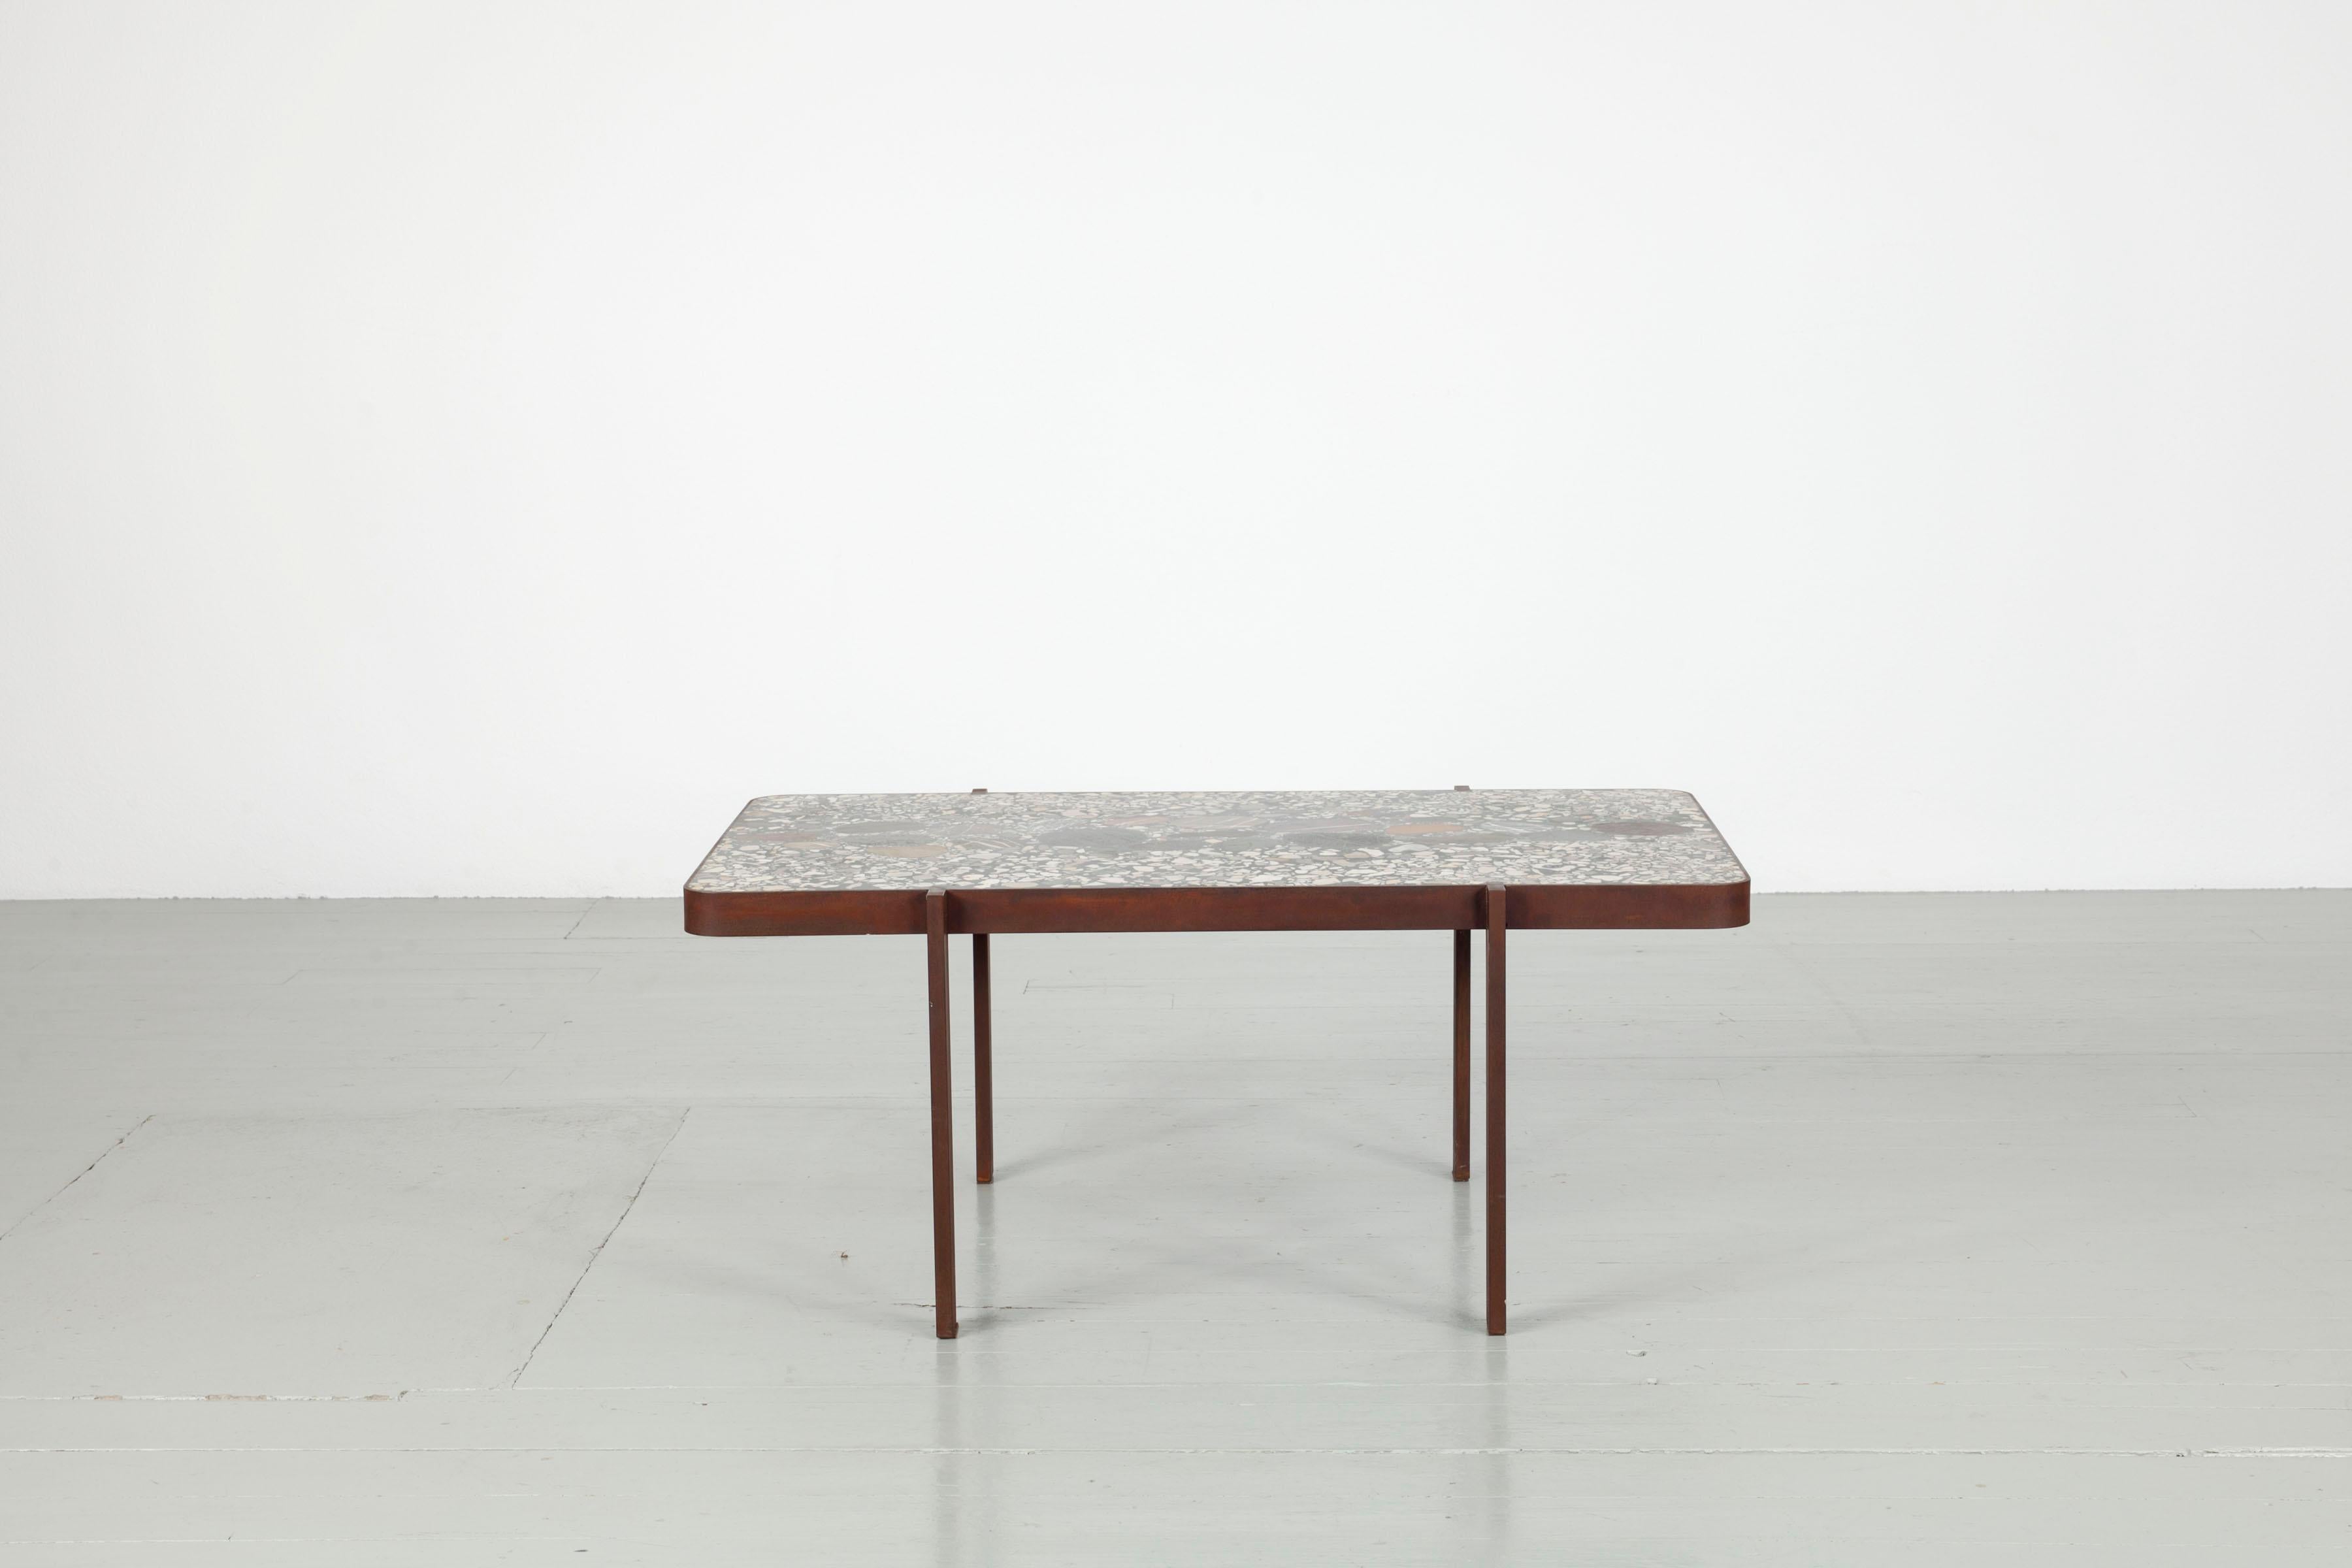 Felix Muhrhofer Contemporary Terrazzo Table with Corroded Steel Construction 3